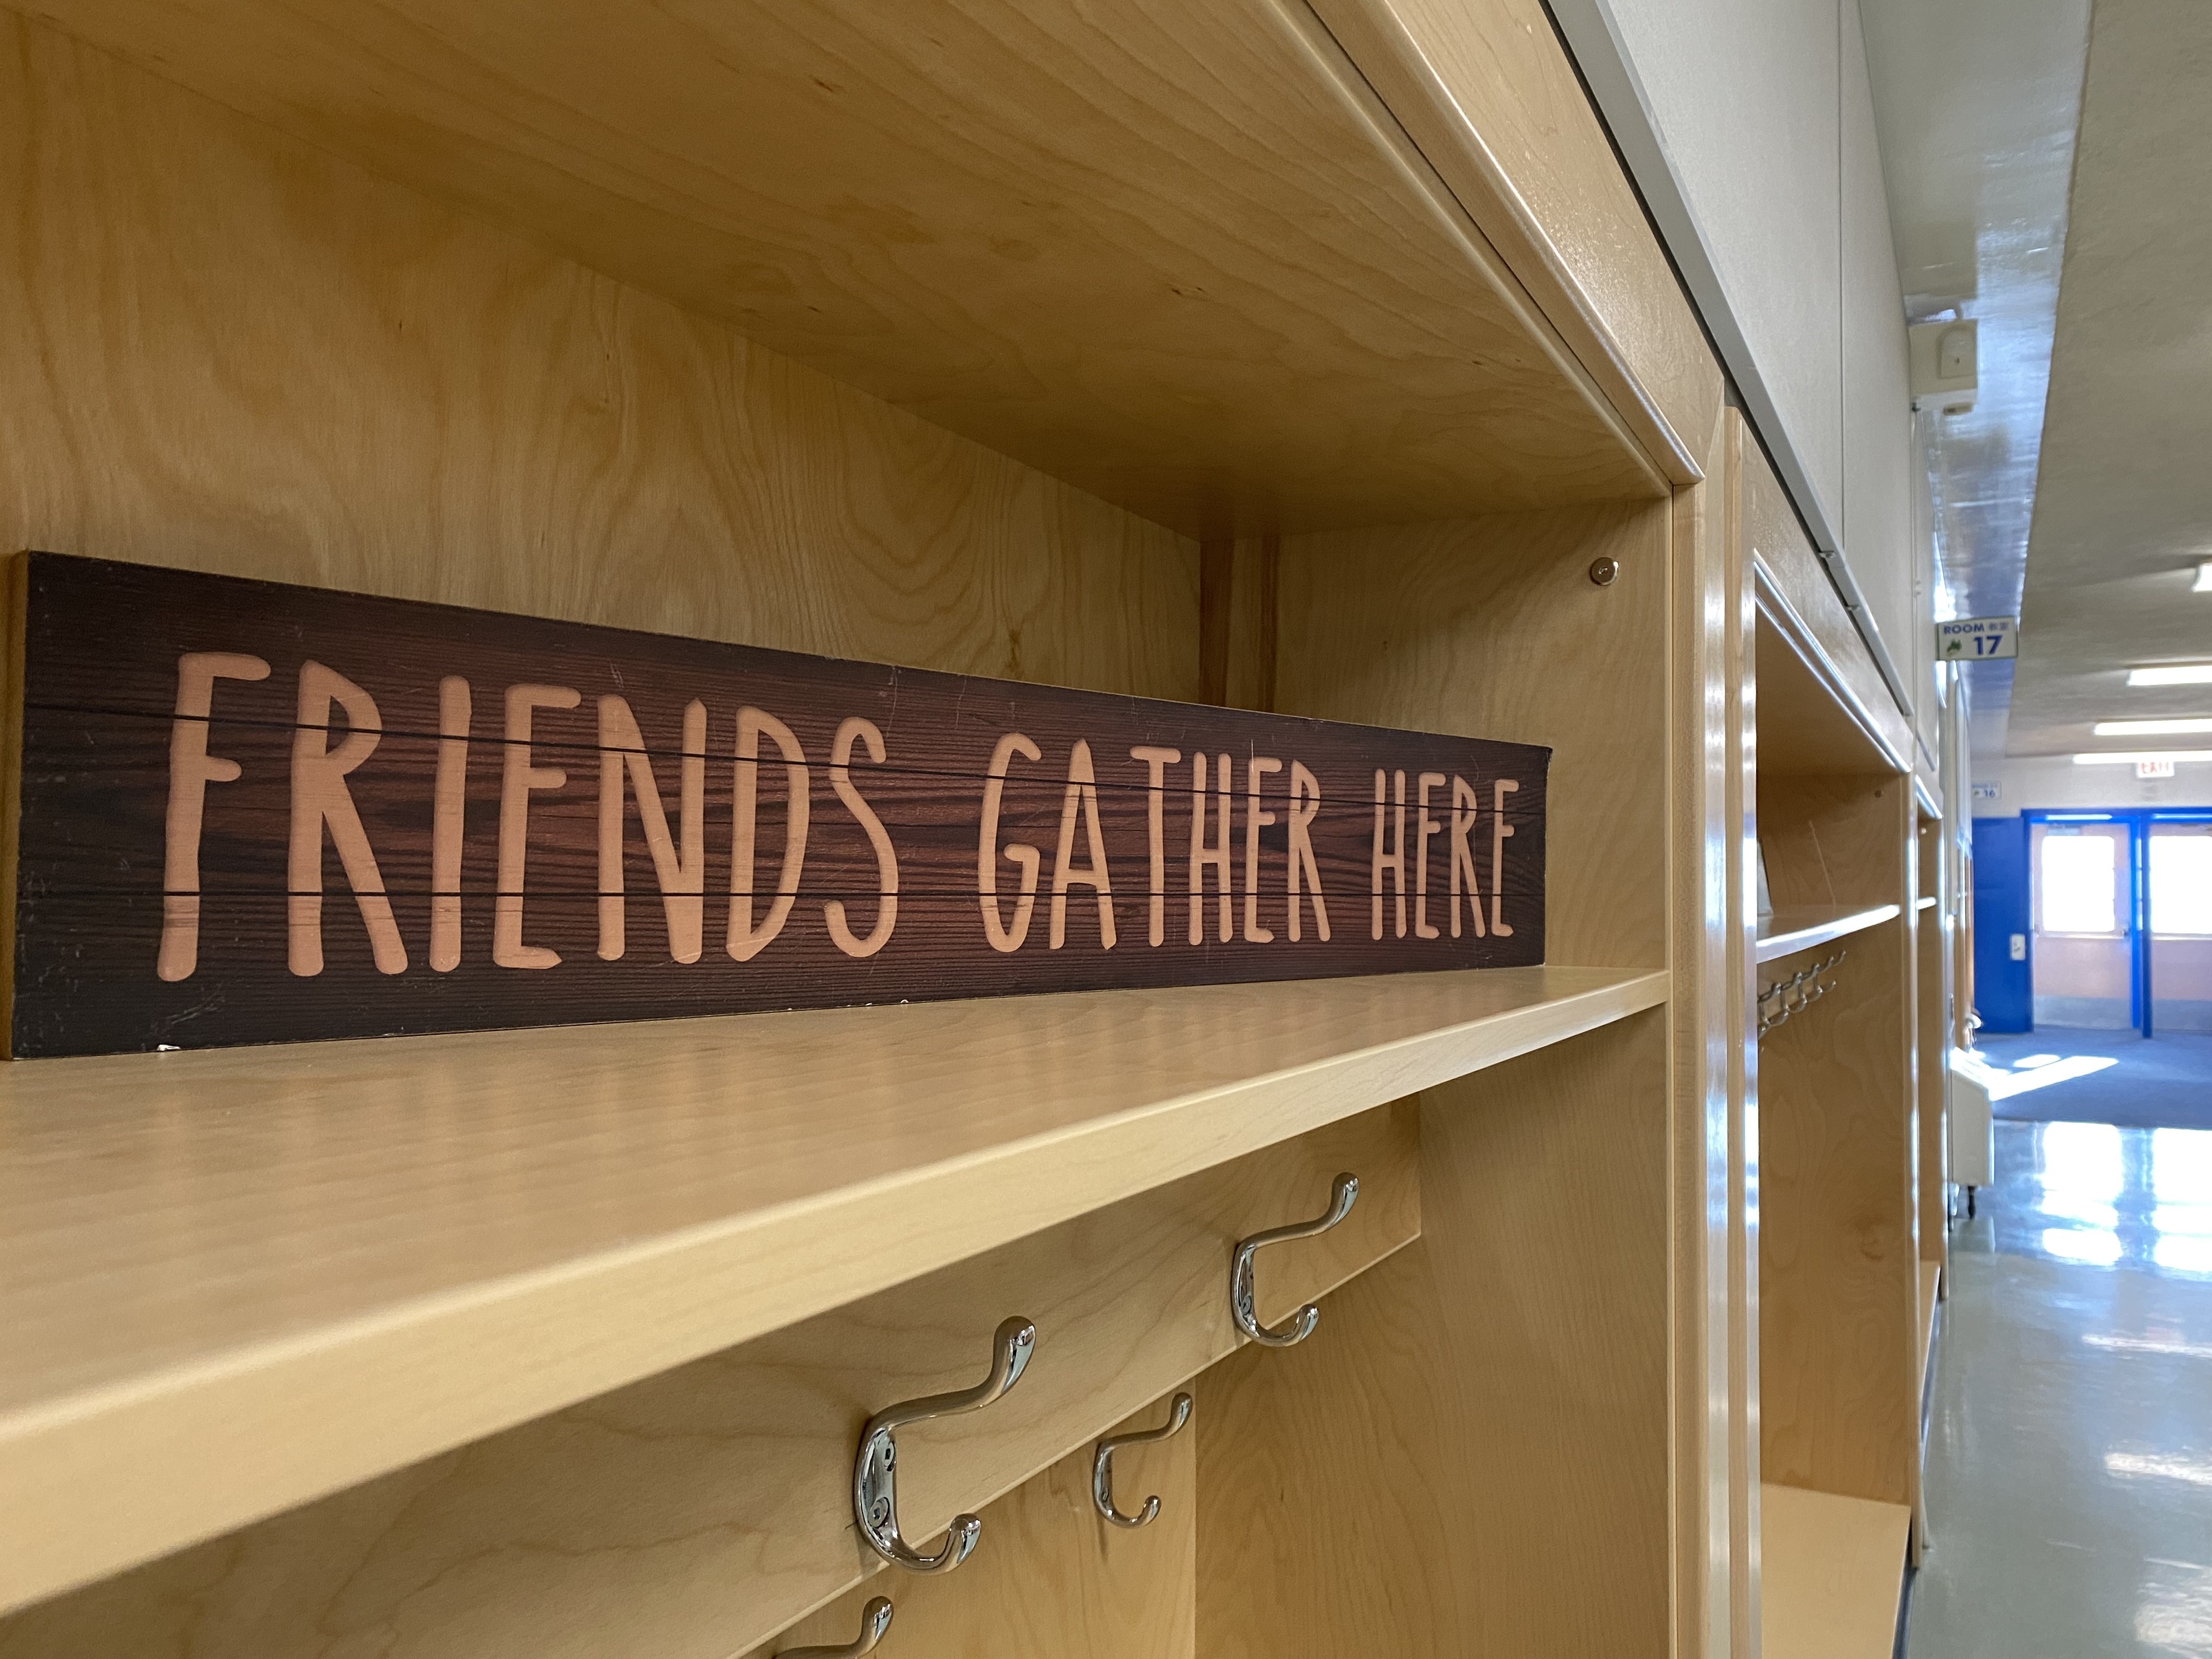 A great place to be... "friends gather here".